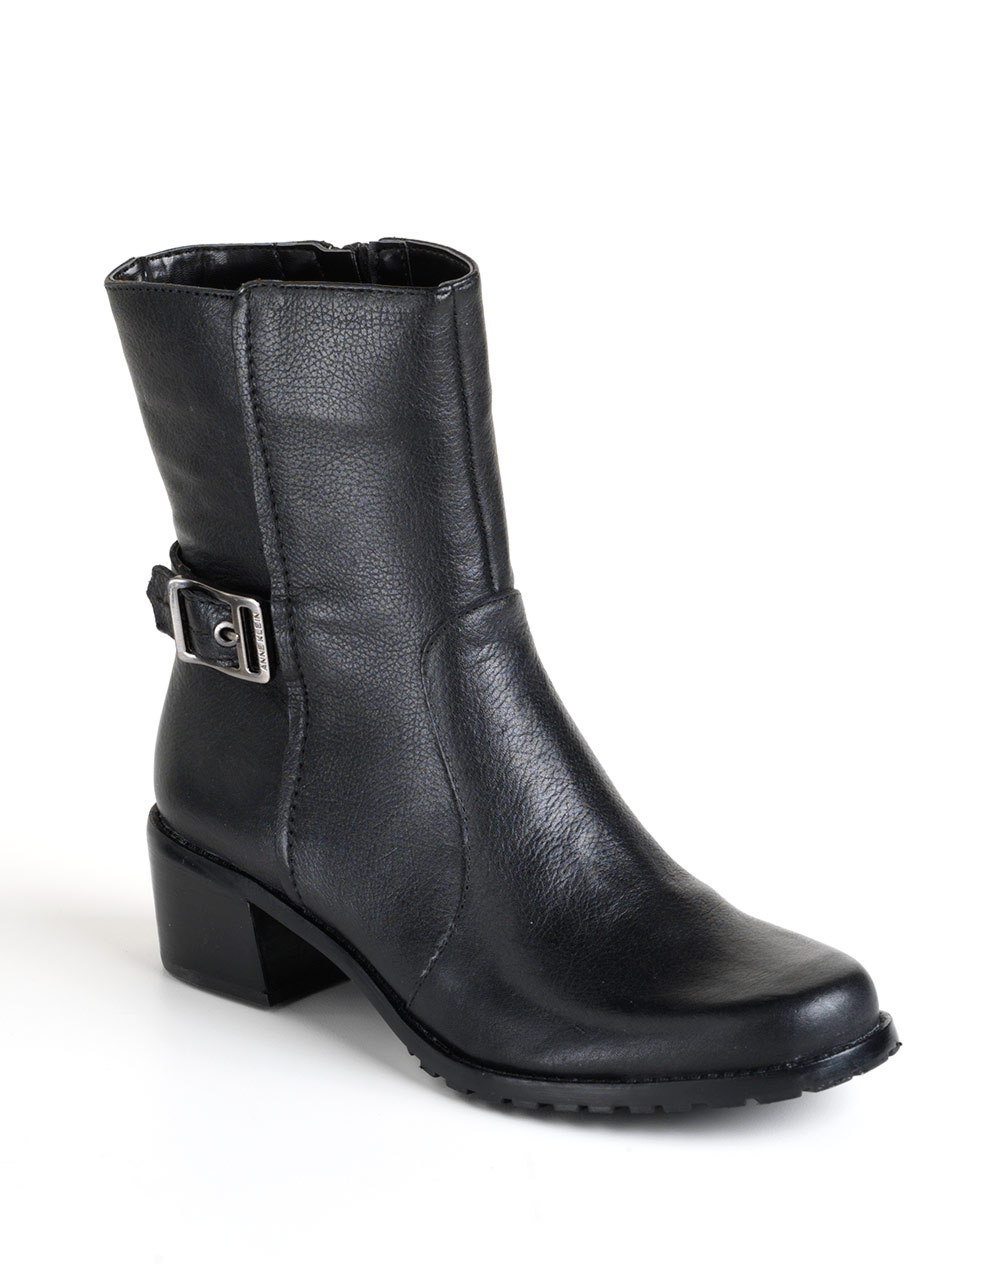 Anne Klein Emiliana Leather Ankle Boots in Black (black leather) | Lyst